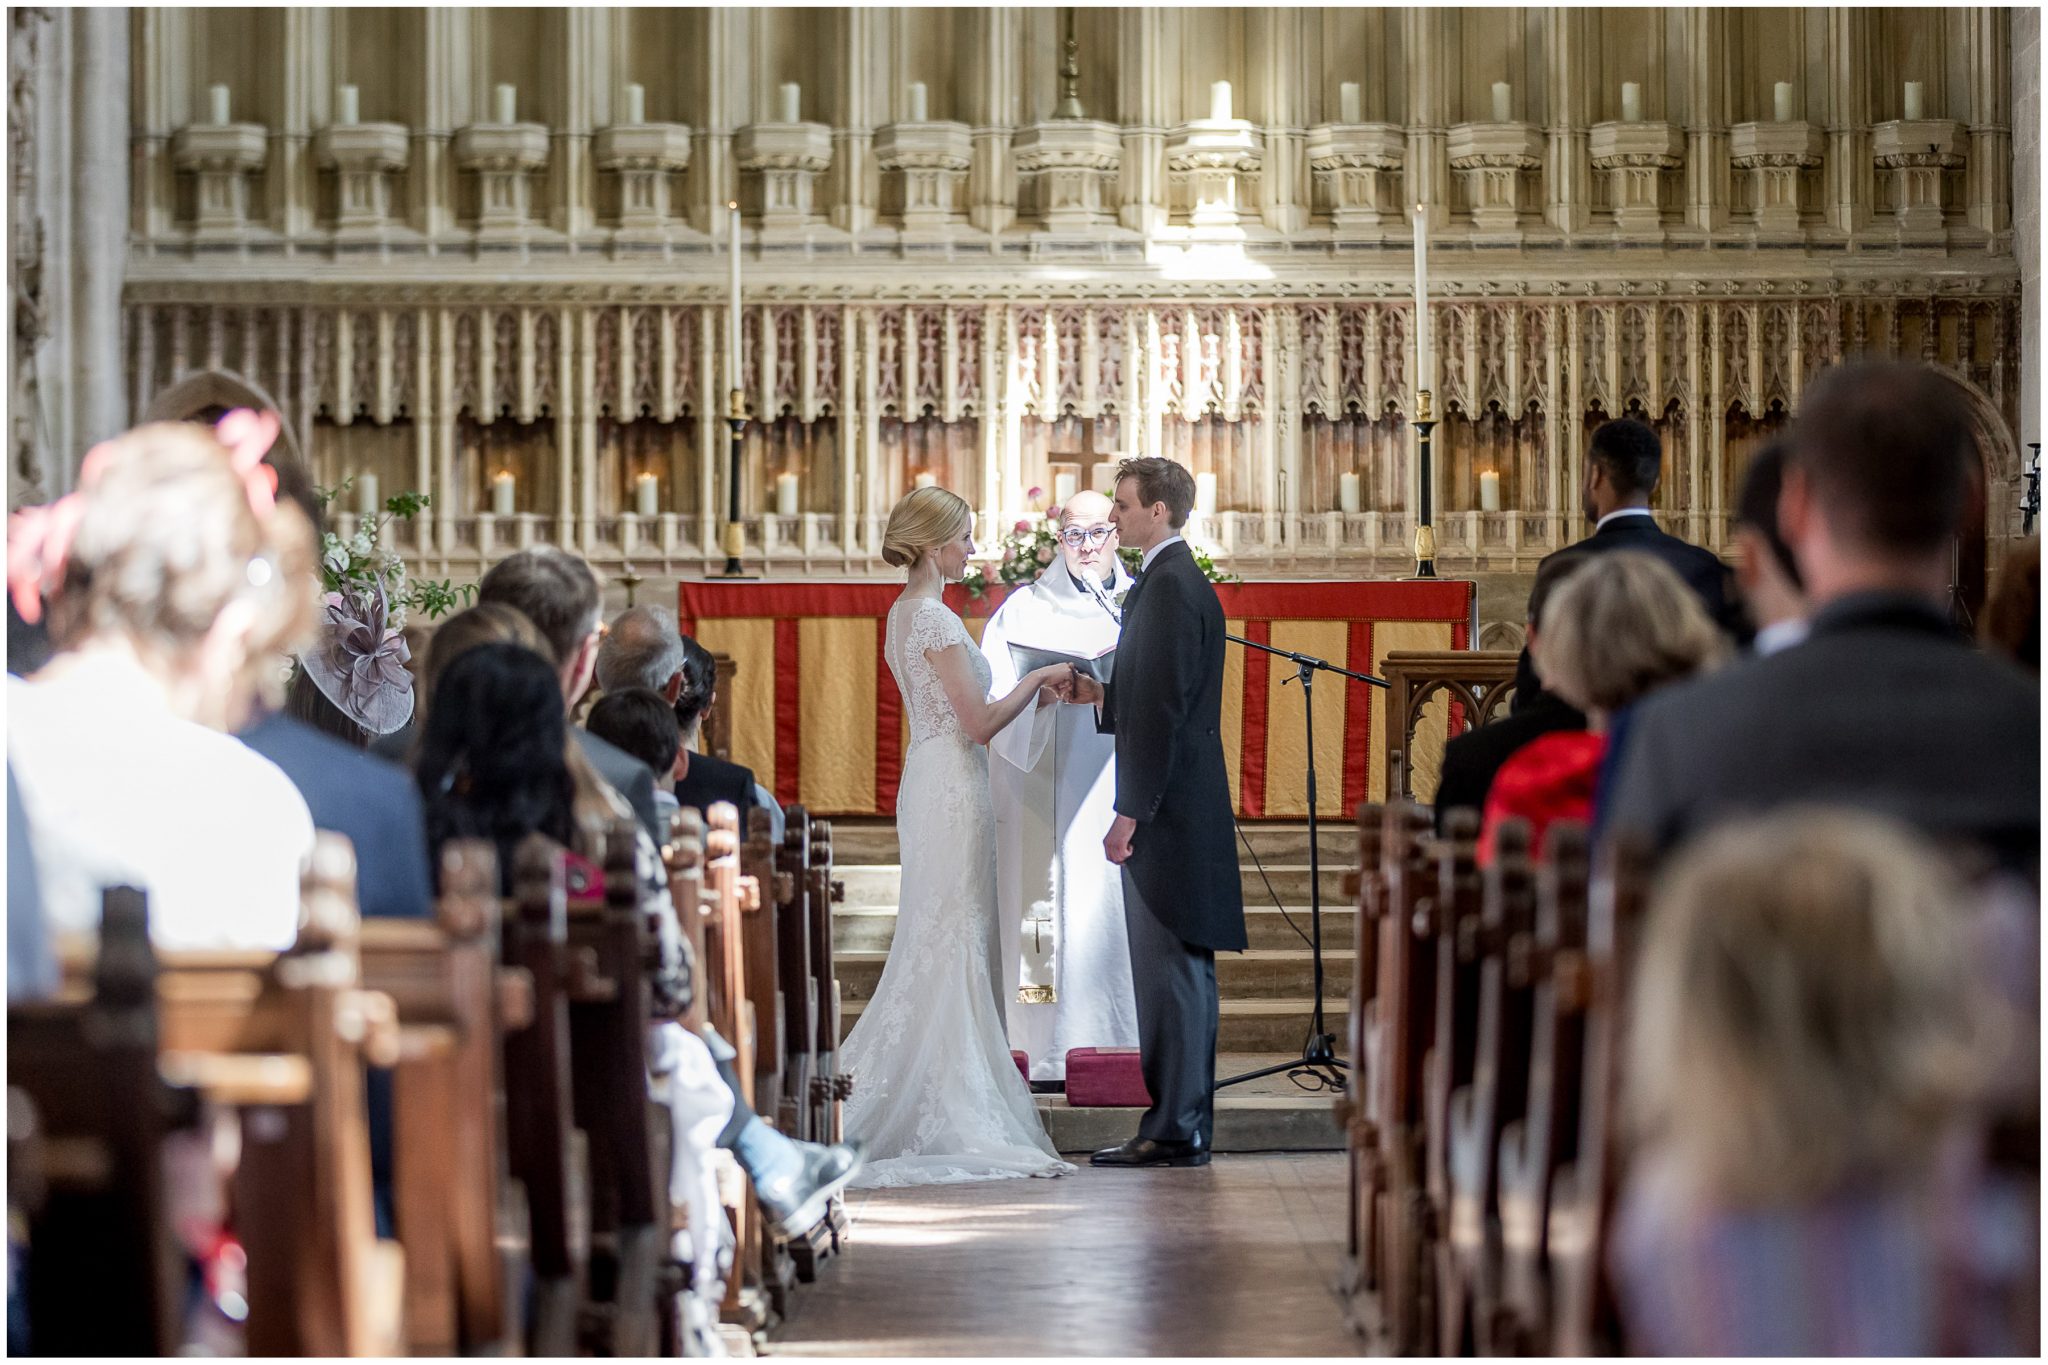 The wedding couple turn to each other to make their marriage vows